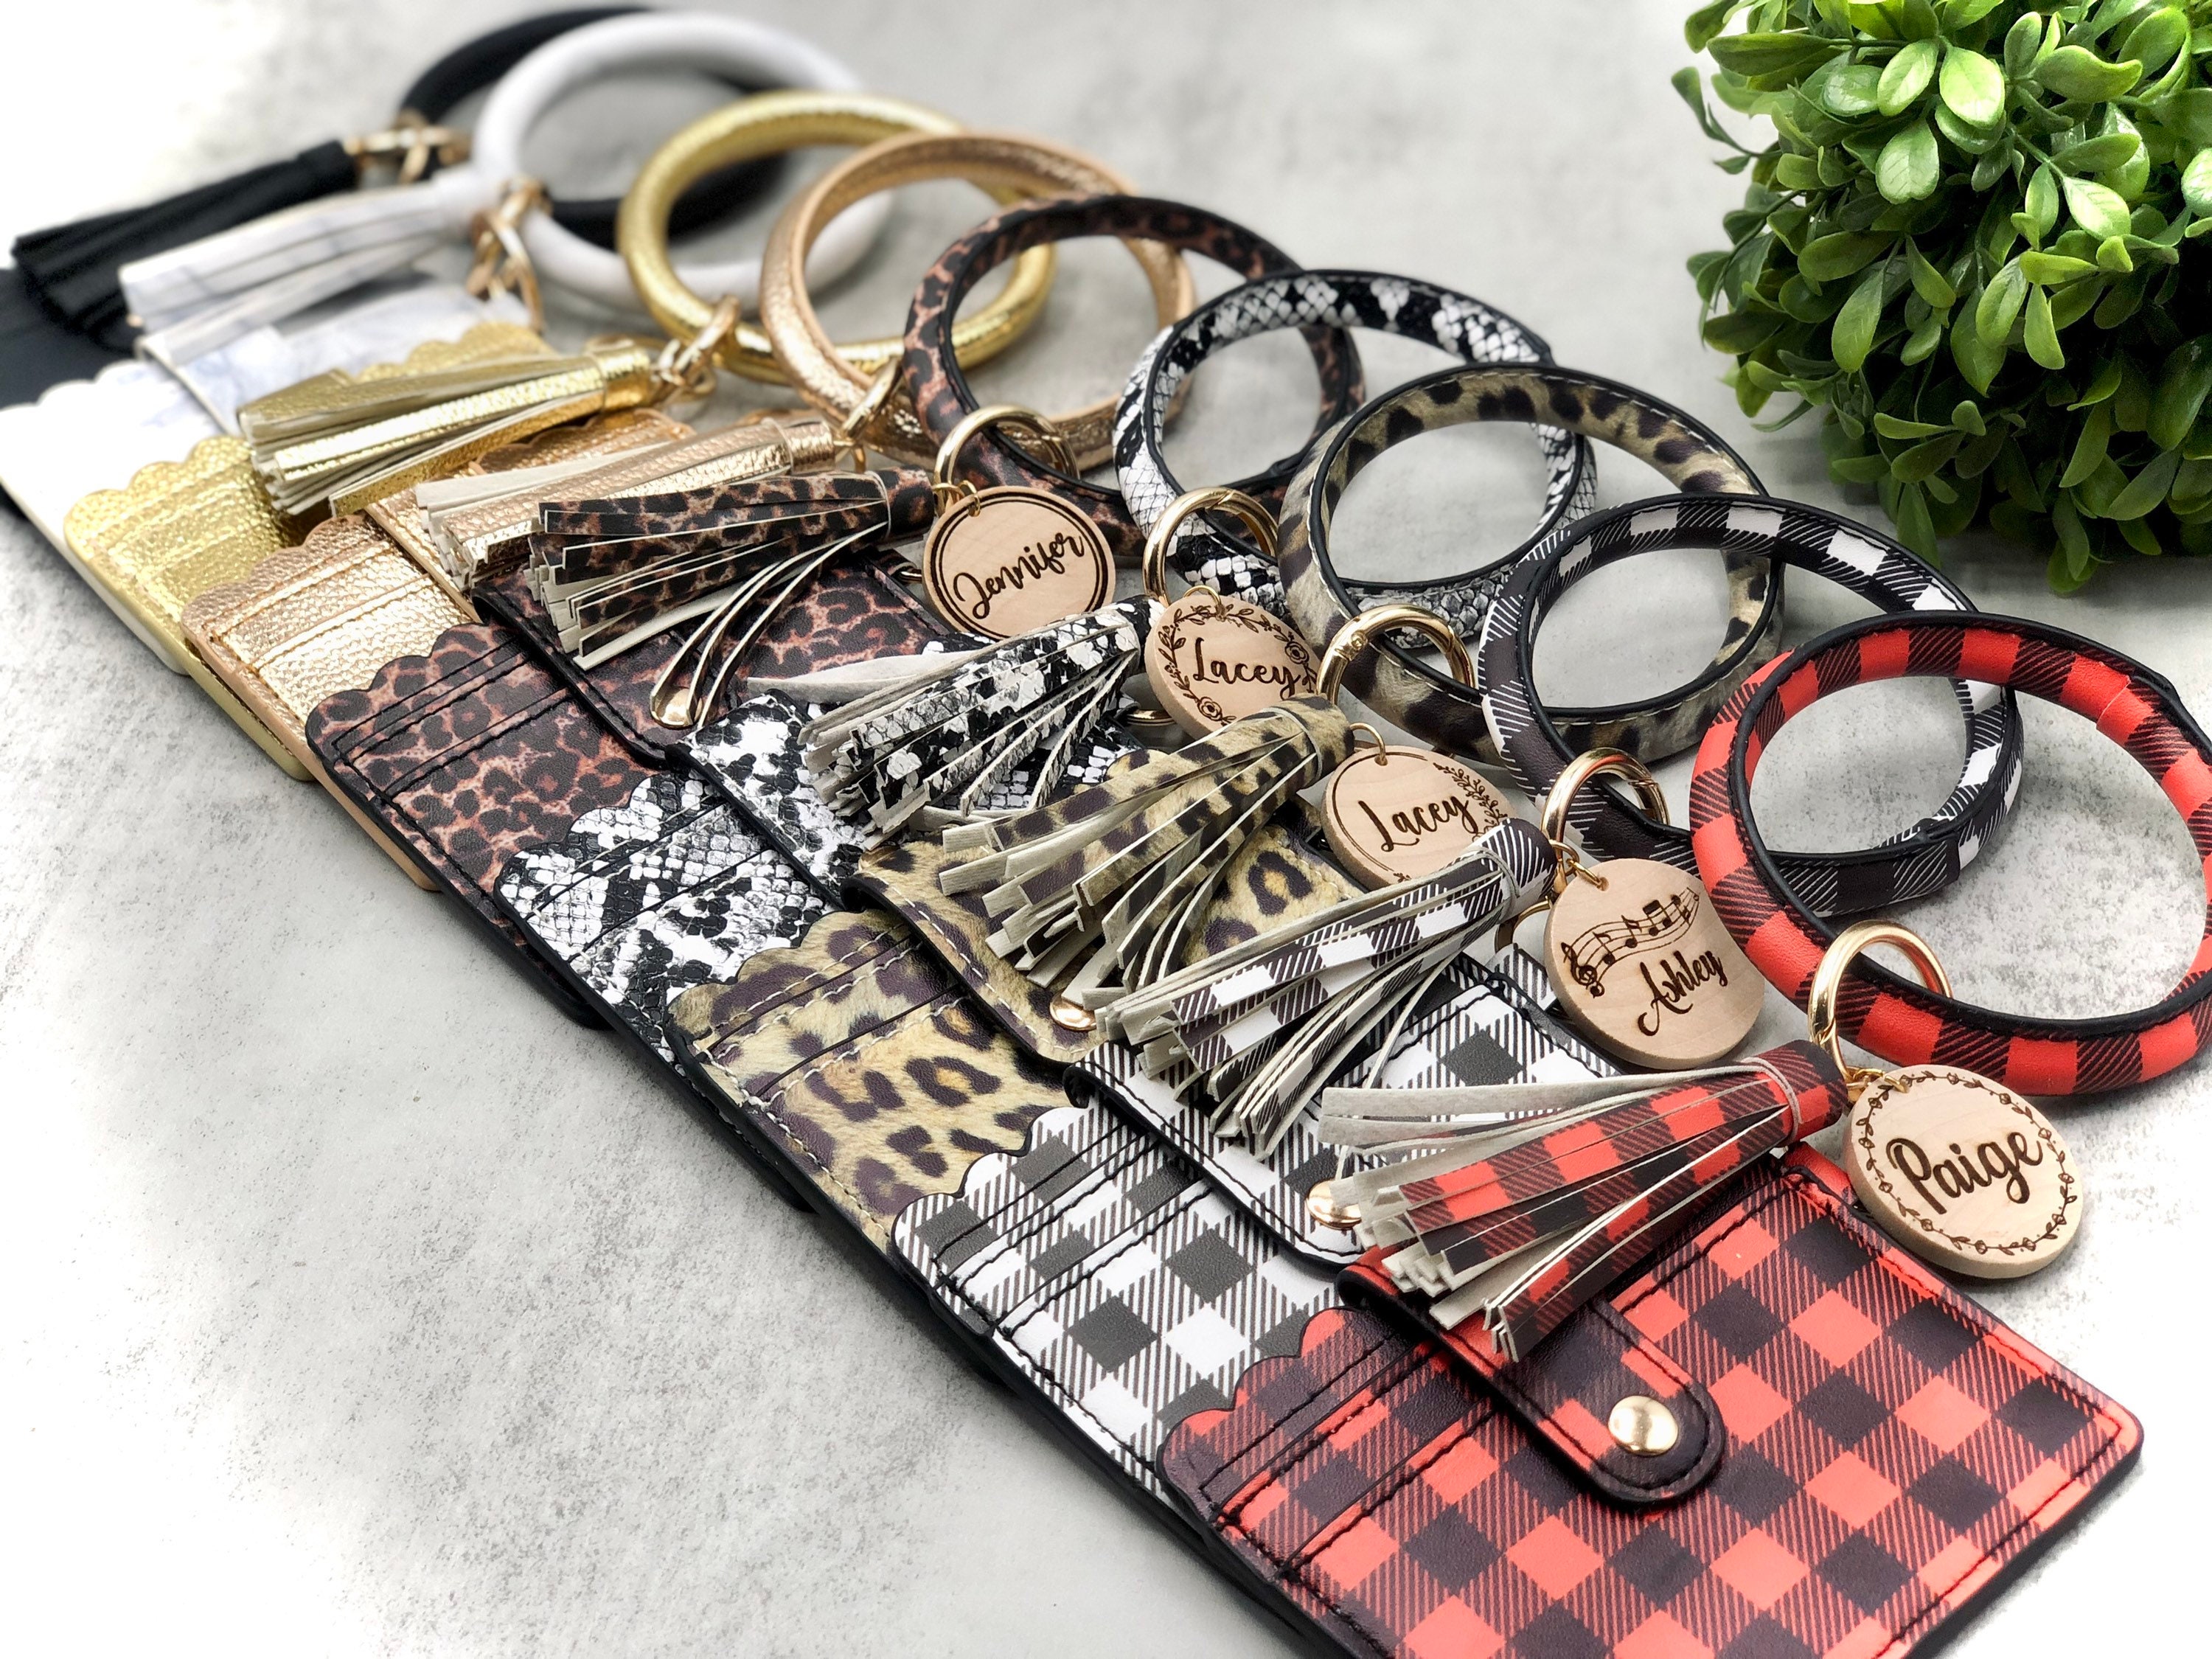 PU Leather Bracelet Wallet Keychain Party Favor Tassels Bangle Key Chain  Bag Holder Card Bag Silicone Beaded Wristlet Keychains FY3399 B1019 From  Toysmall666, $4.59 | DHgate.Com